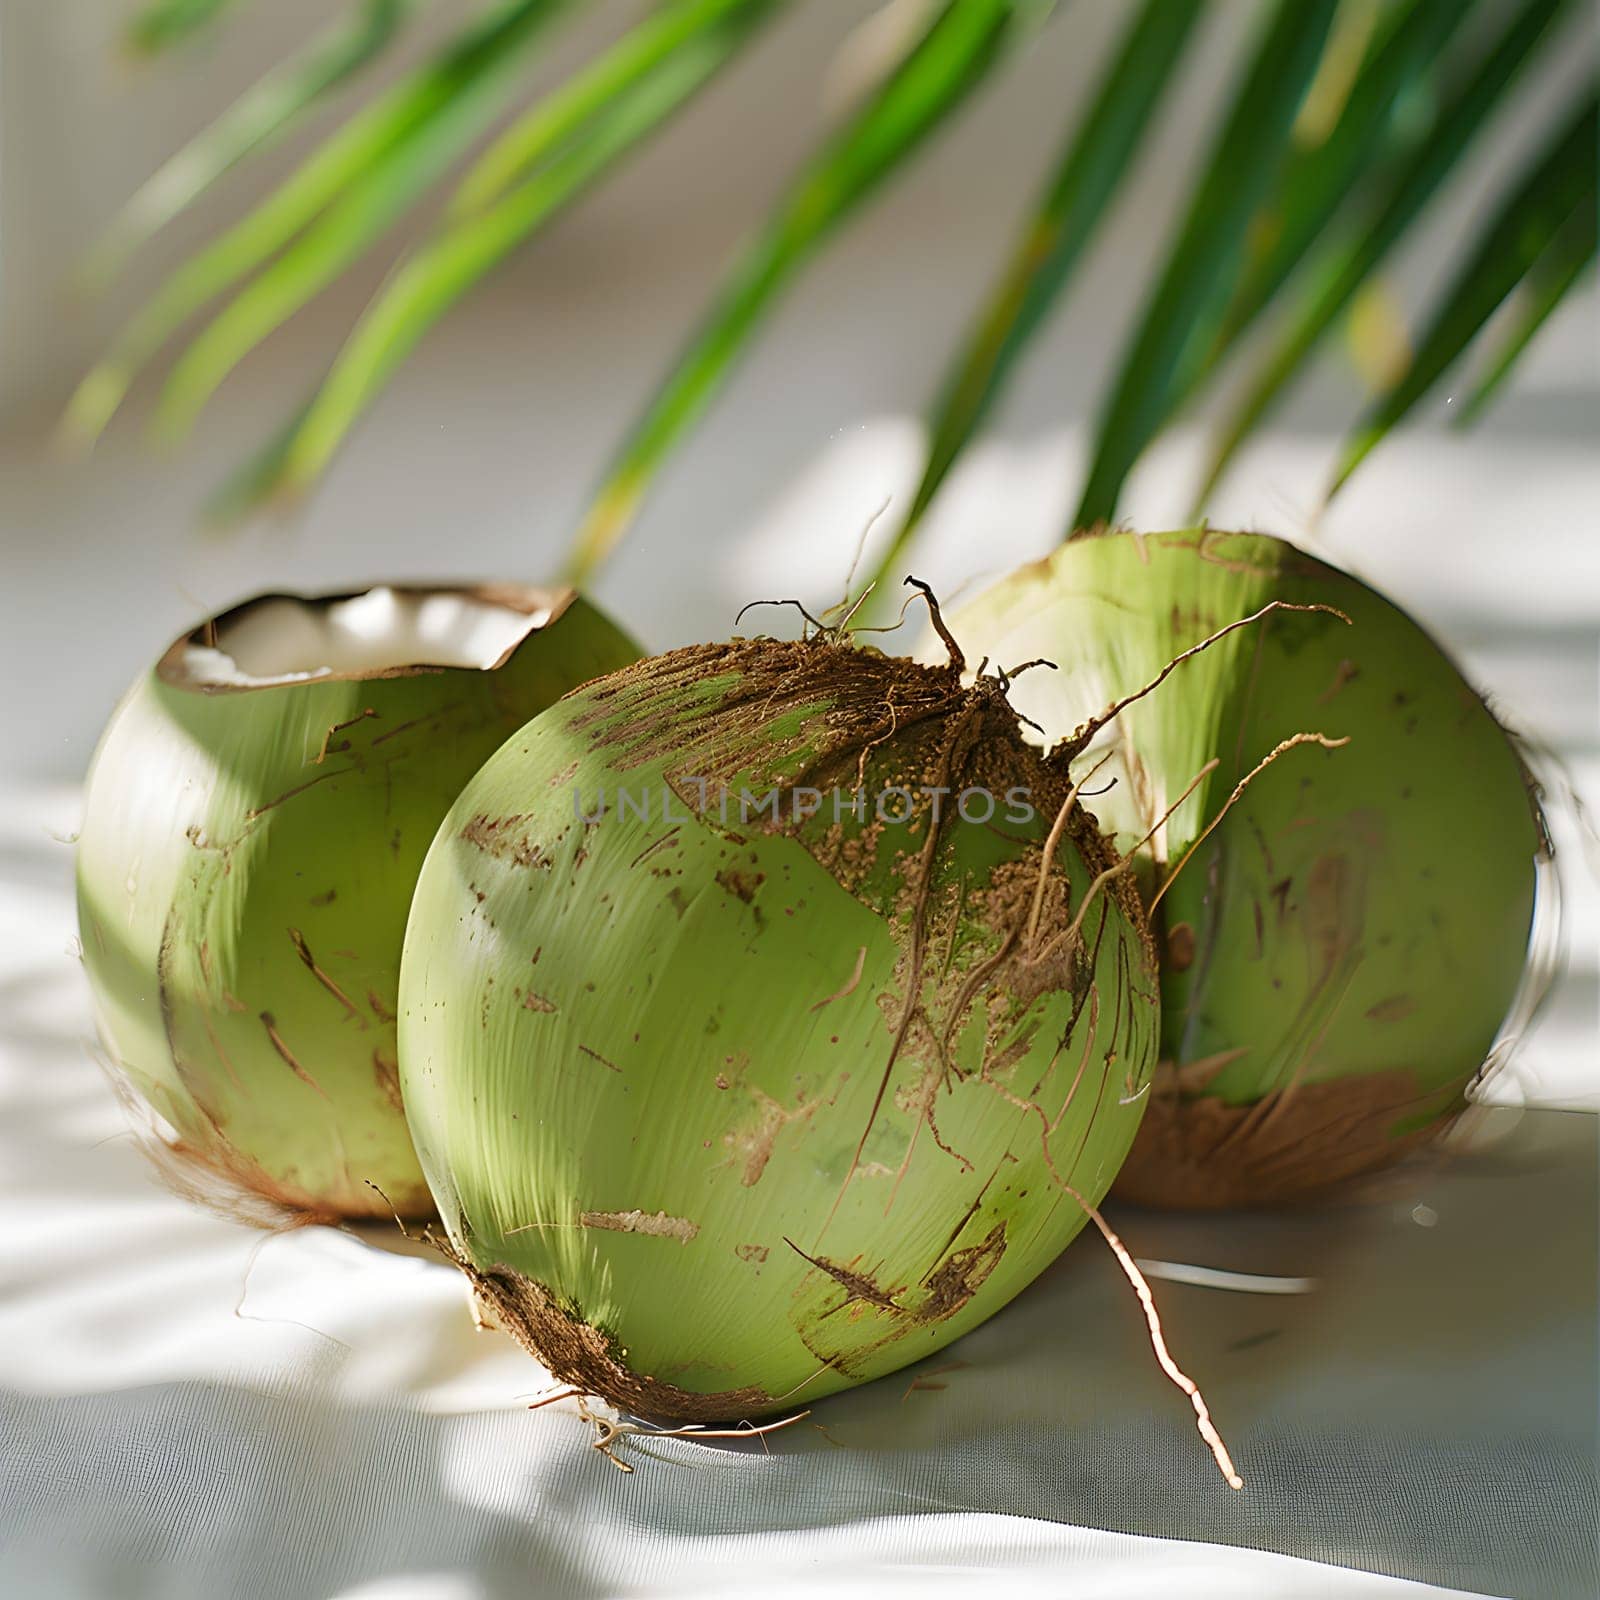 Three green coconuts displayed on a table with a palm tree in the background, showcasing the beauty of this terrestrial plant. Coconuts are versatile ingredients used in various natural foods